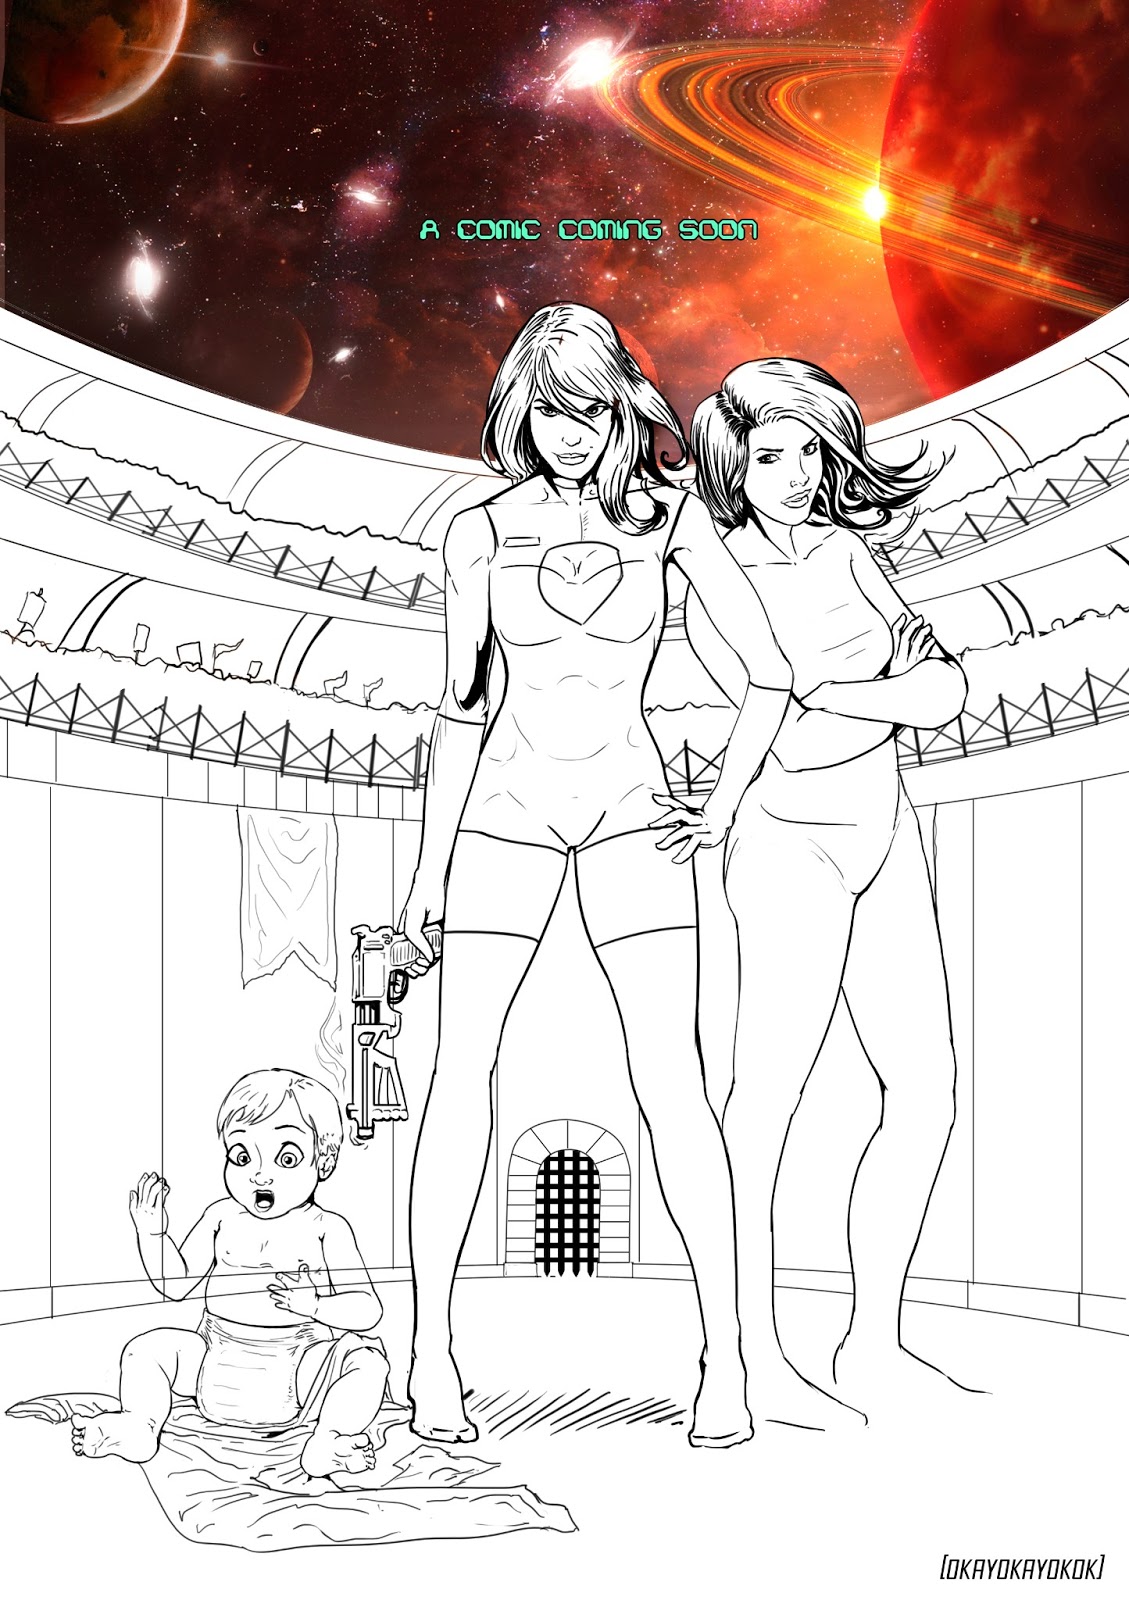 This is a commissioned cover for an Age Regression comic, "The Regress...